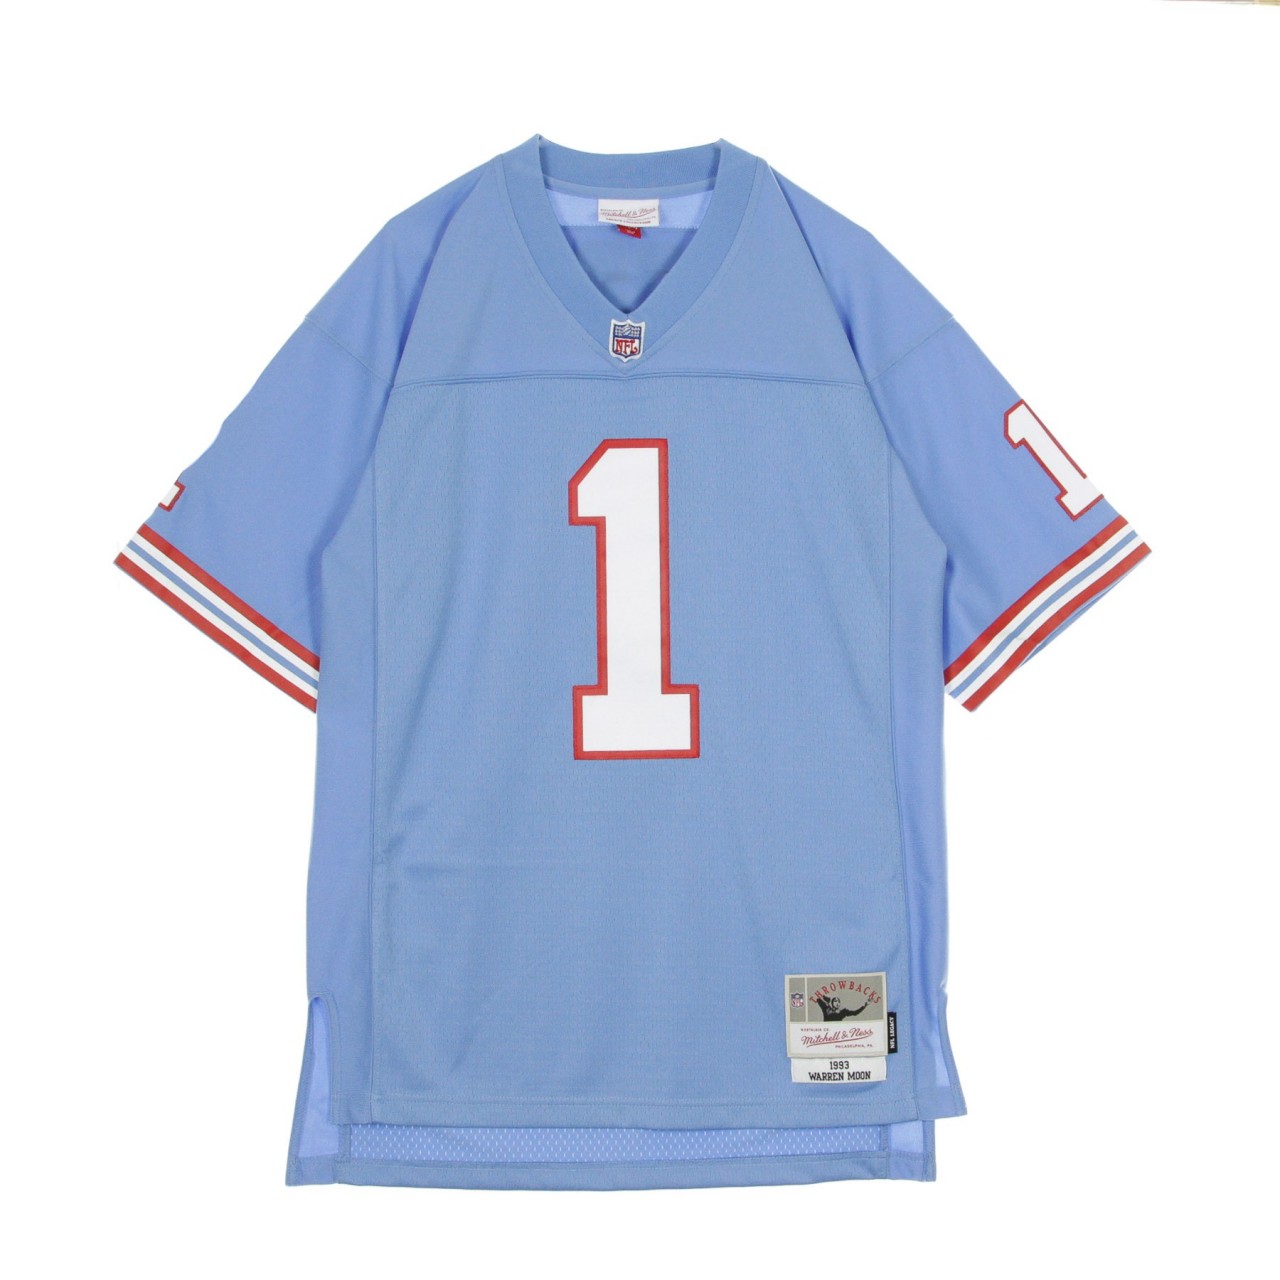 MITCHELL & NESS NFL LEGACY JERSEY WARREN MOON NO.1 HOUSTON OILERS 1993 HOME LGJYAC18119-HOILTBL93WMO